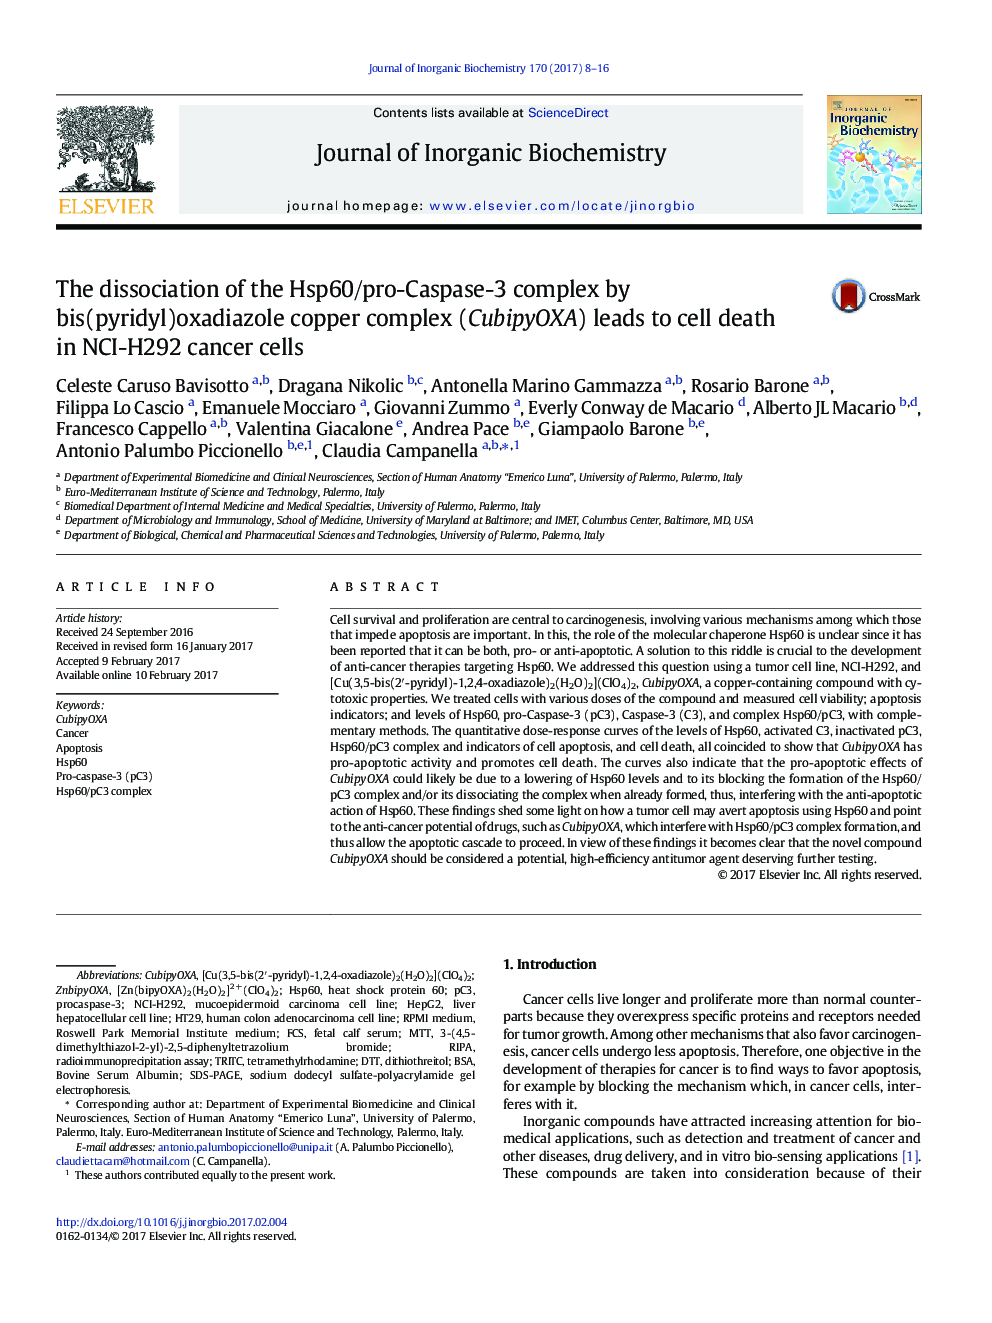 The dissociation of the Hsp60/pro-Caspase-3 complex by bis(pyridyl)oxadiazole copper complex (CubipyOXA) leads to cell death in NCI-H292 cancer cells